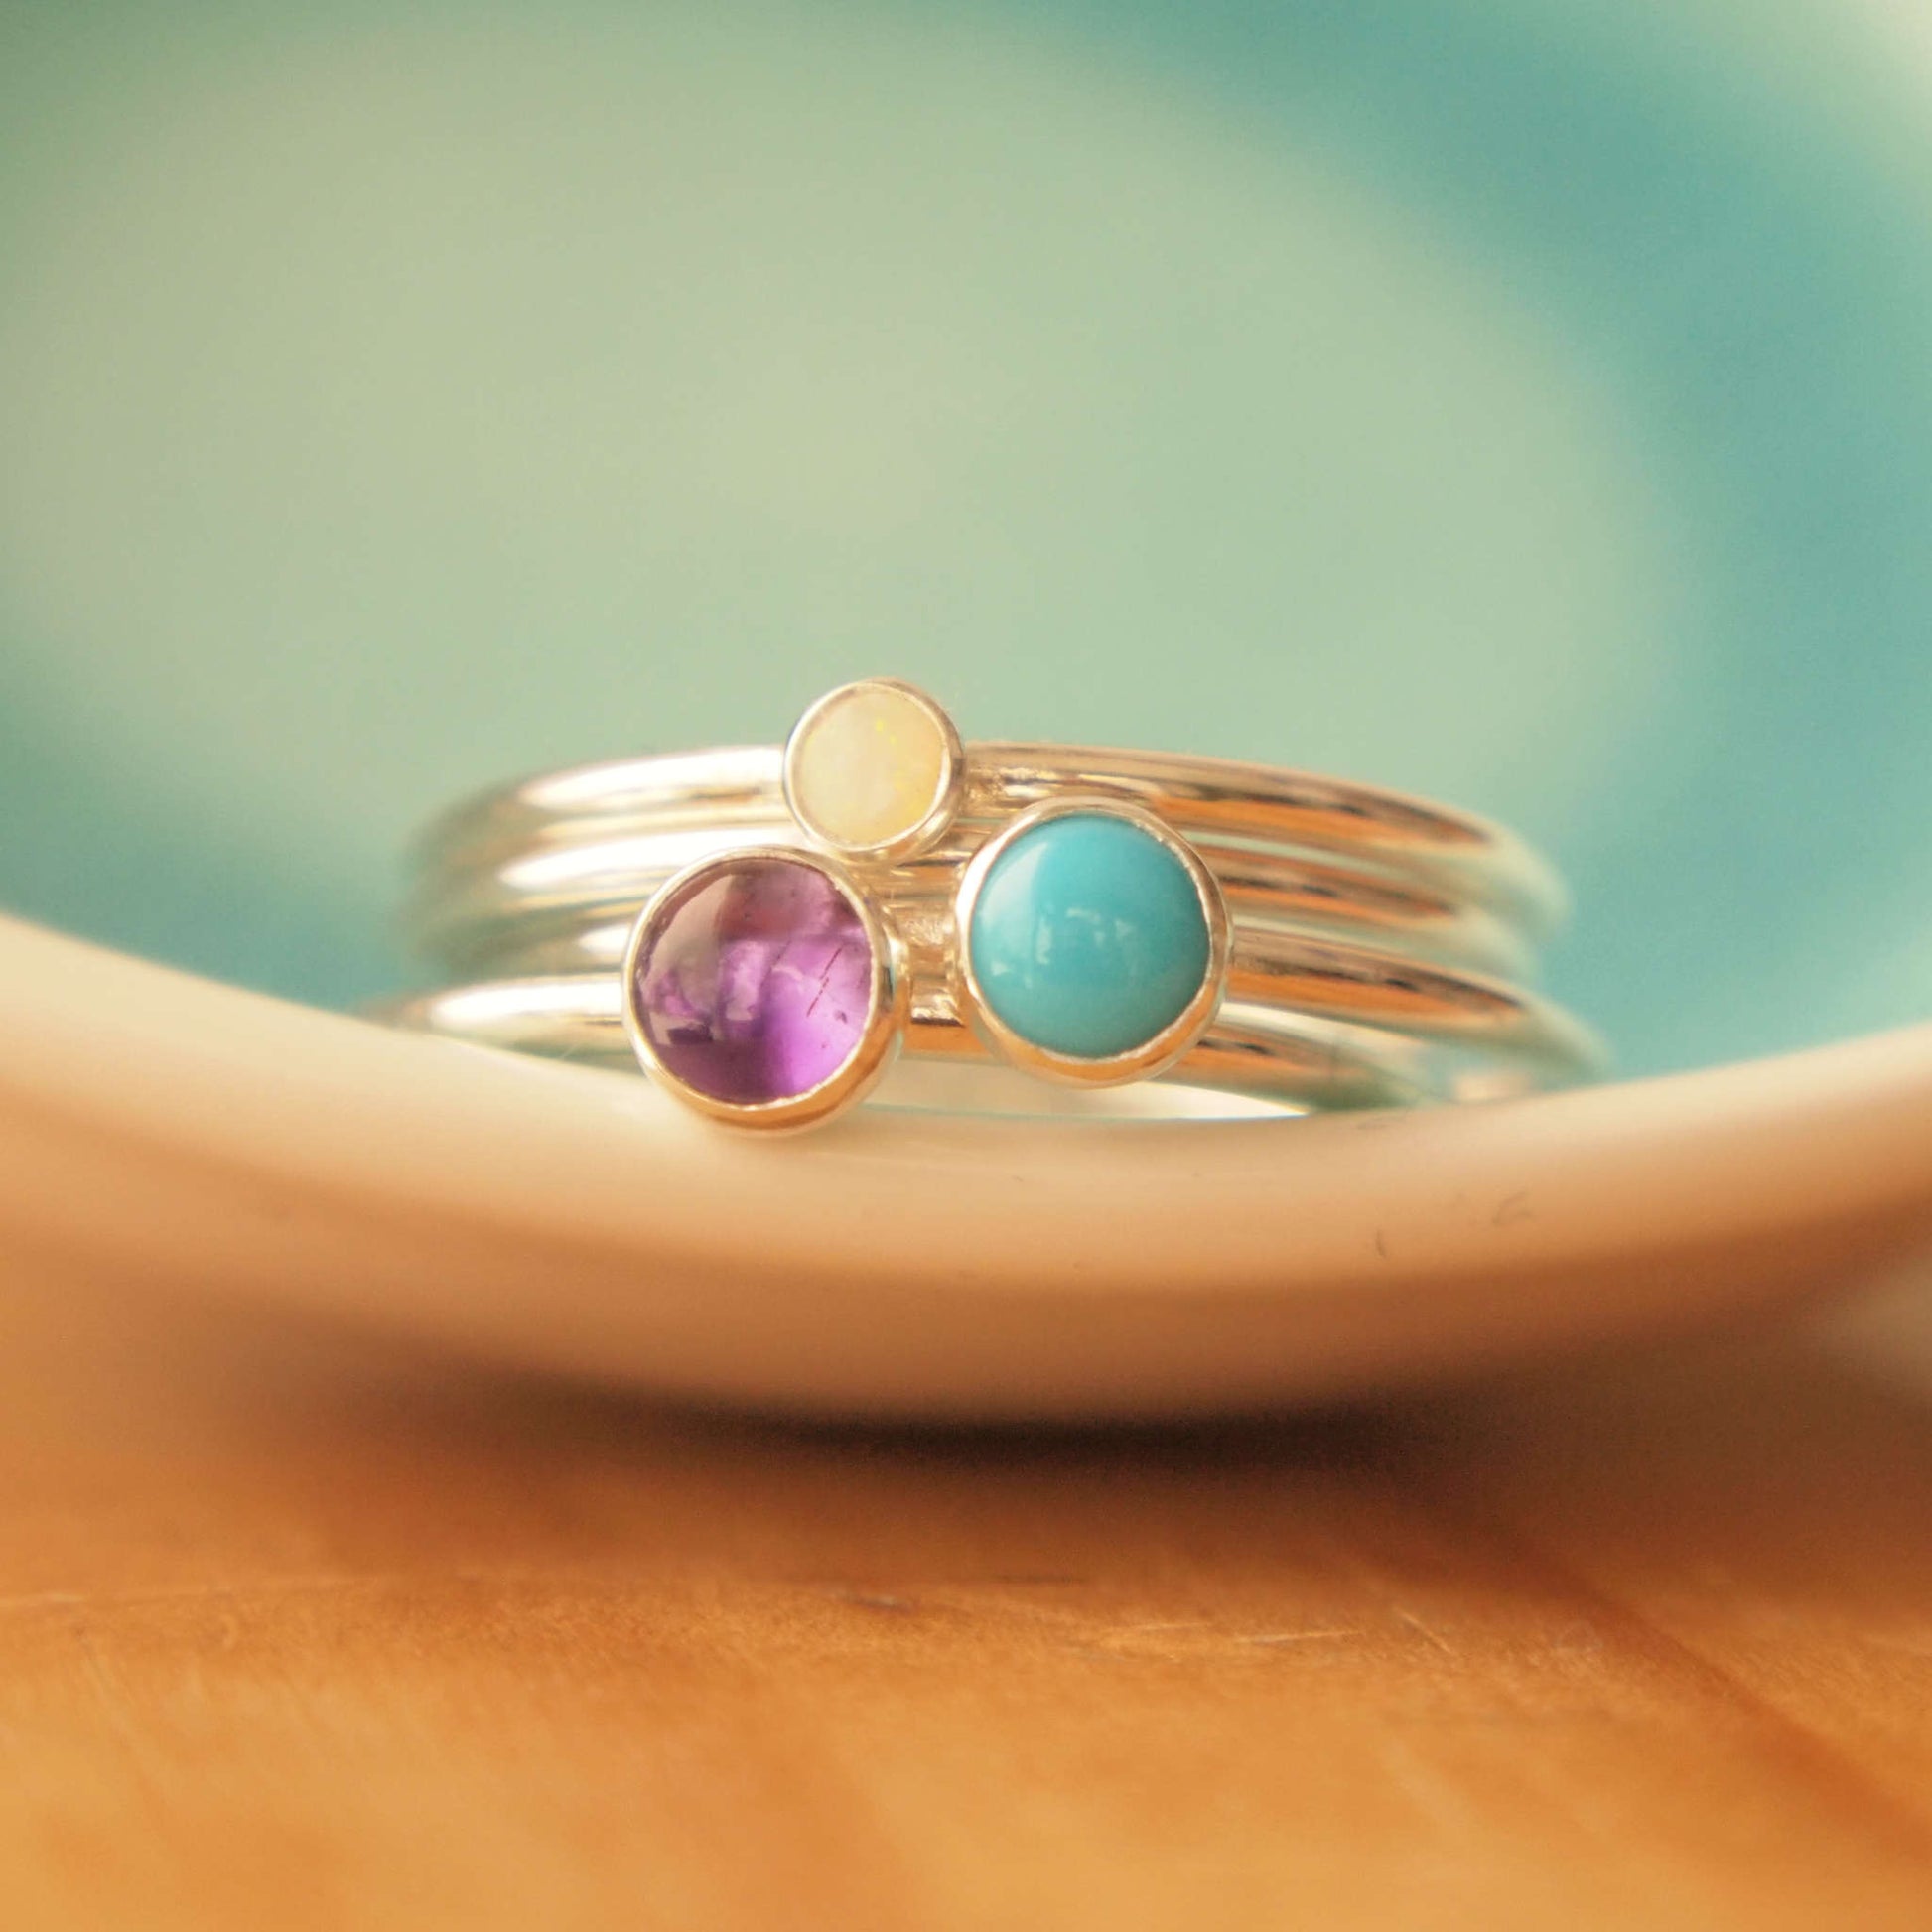 Family Birthstone Ring set with Amethyst, Turquoise and Opal in Sterling Silver. Handmade by maram jewellery in Scotland